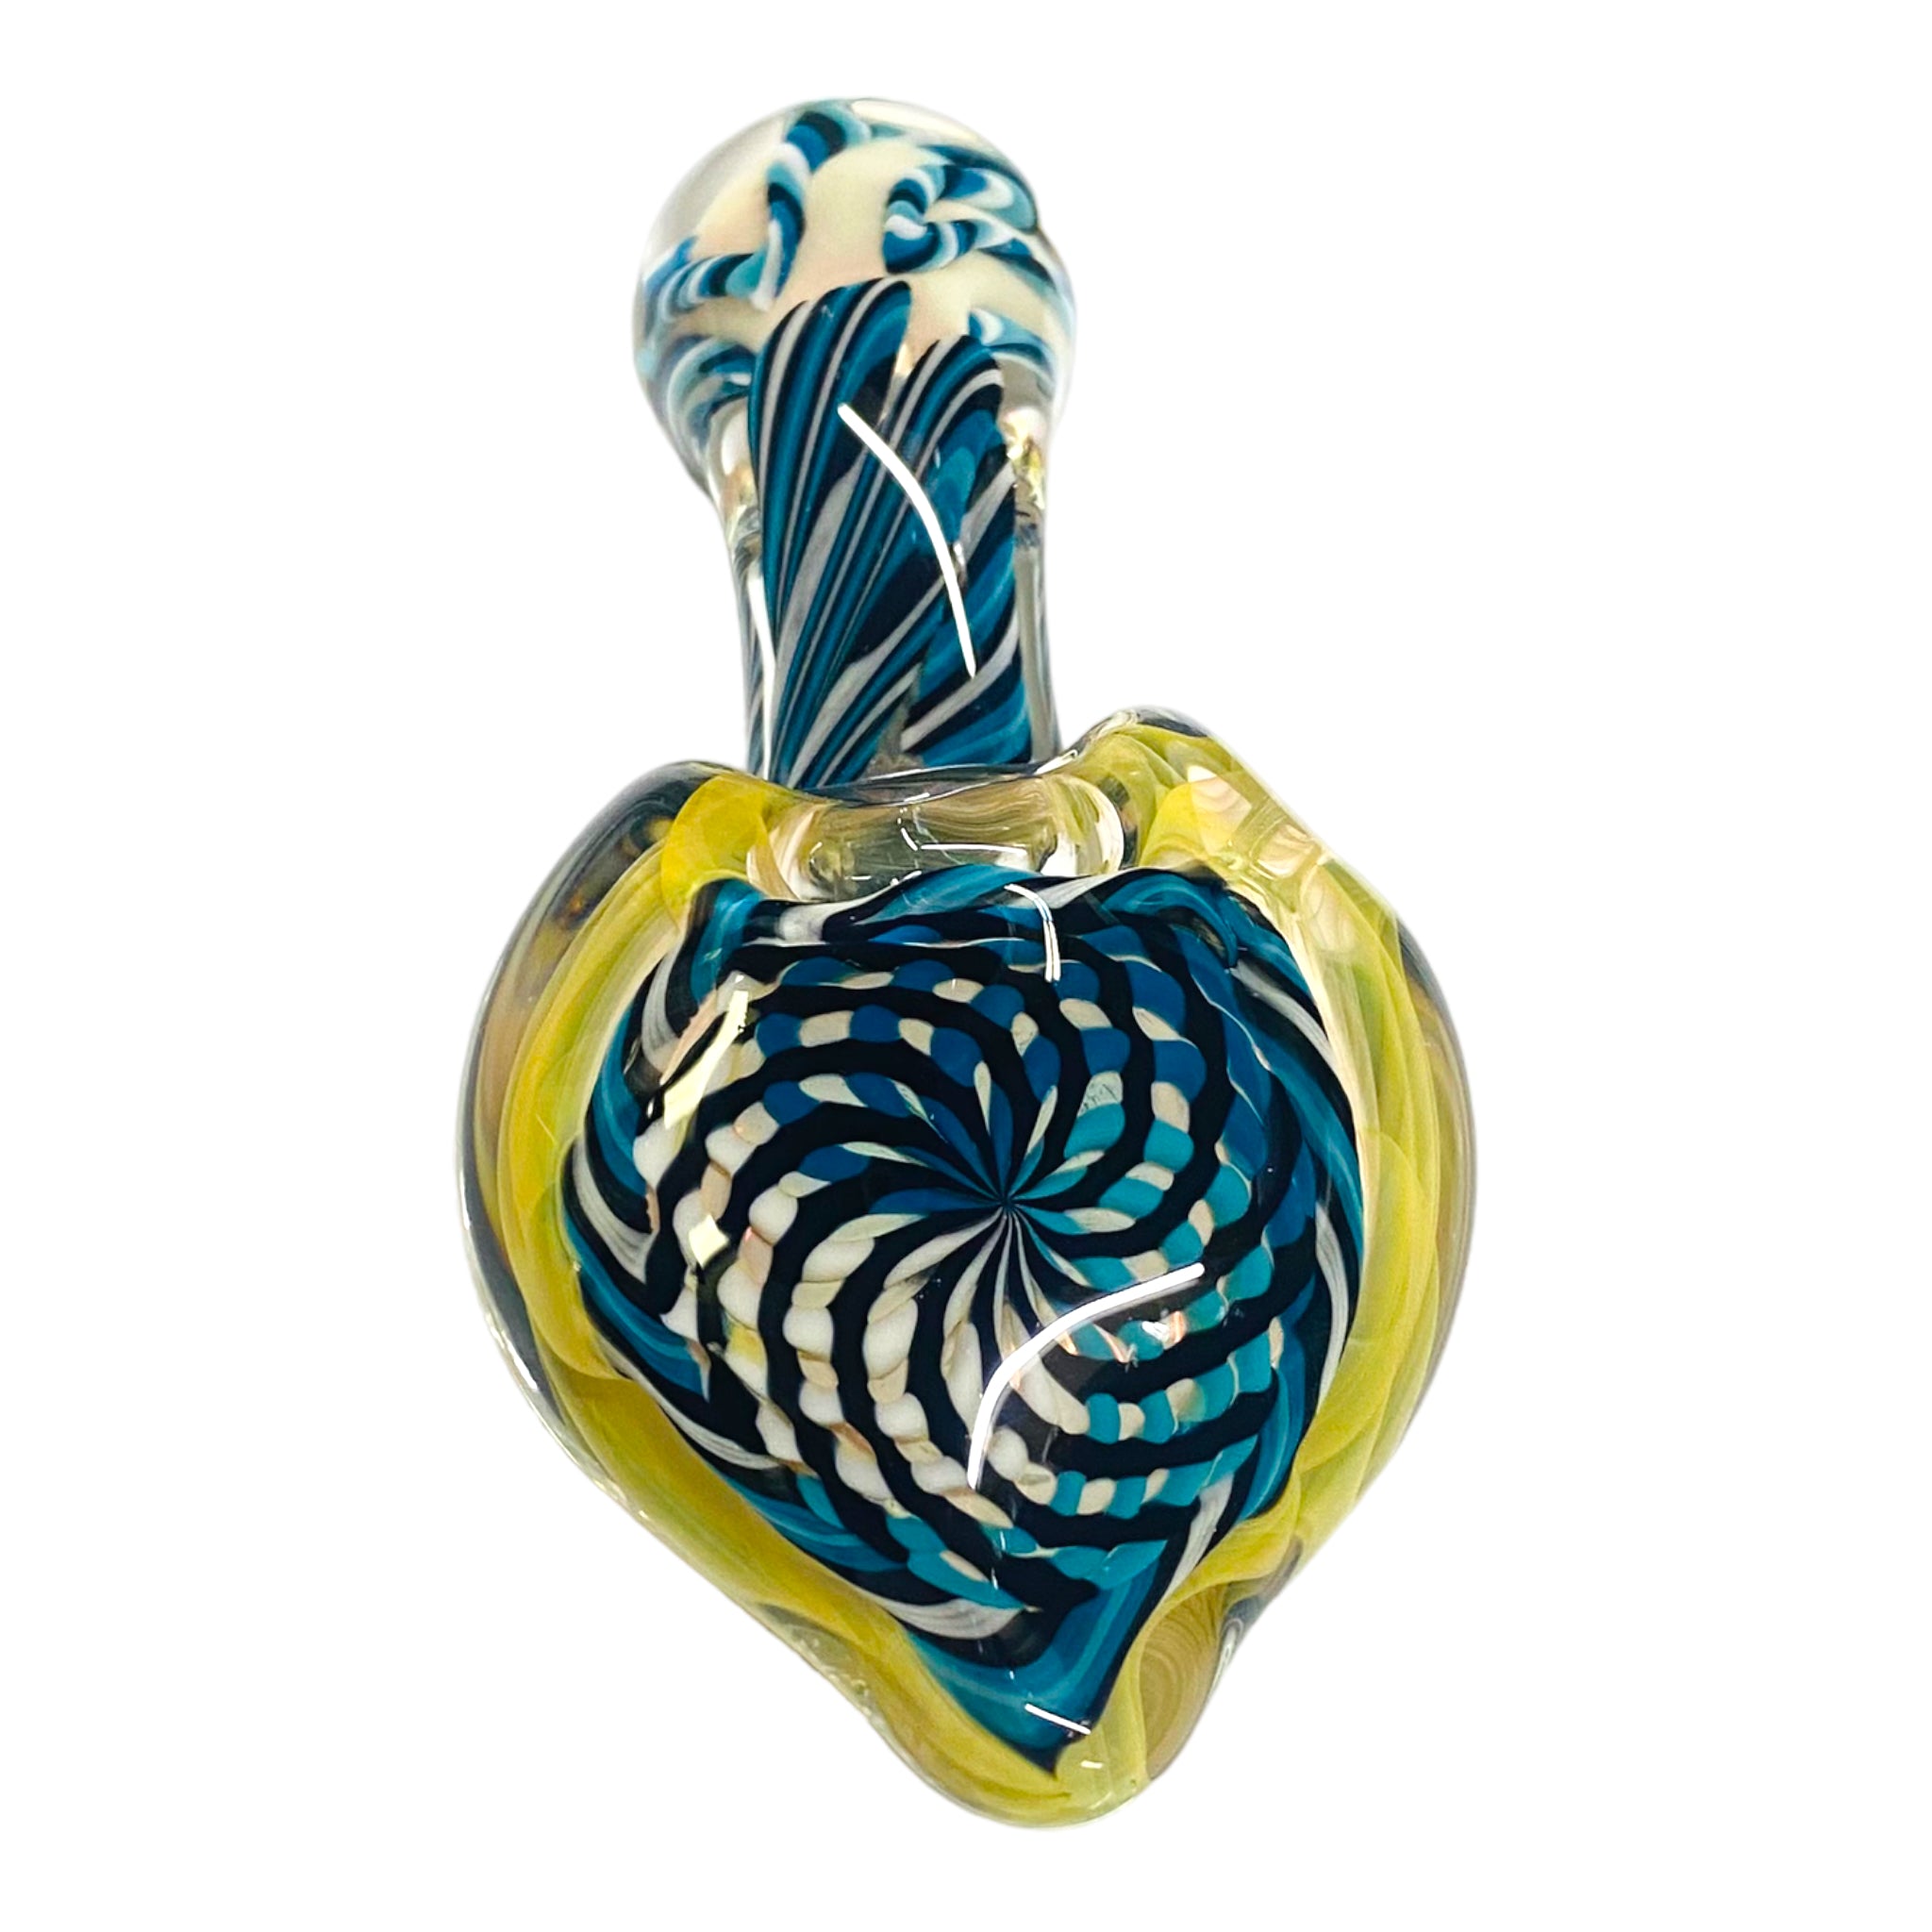 Talent Glass Works - Glass Sherlock With Blue And Black